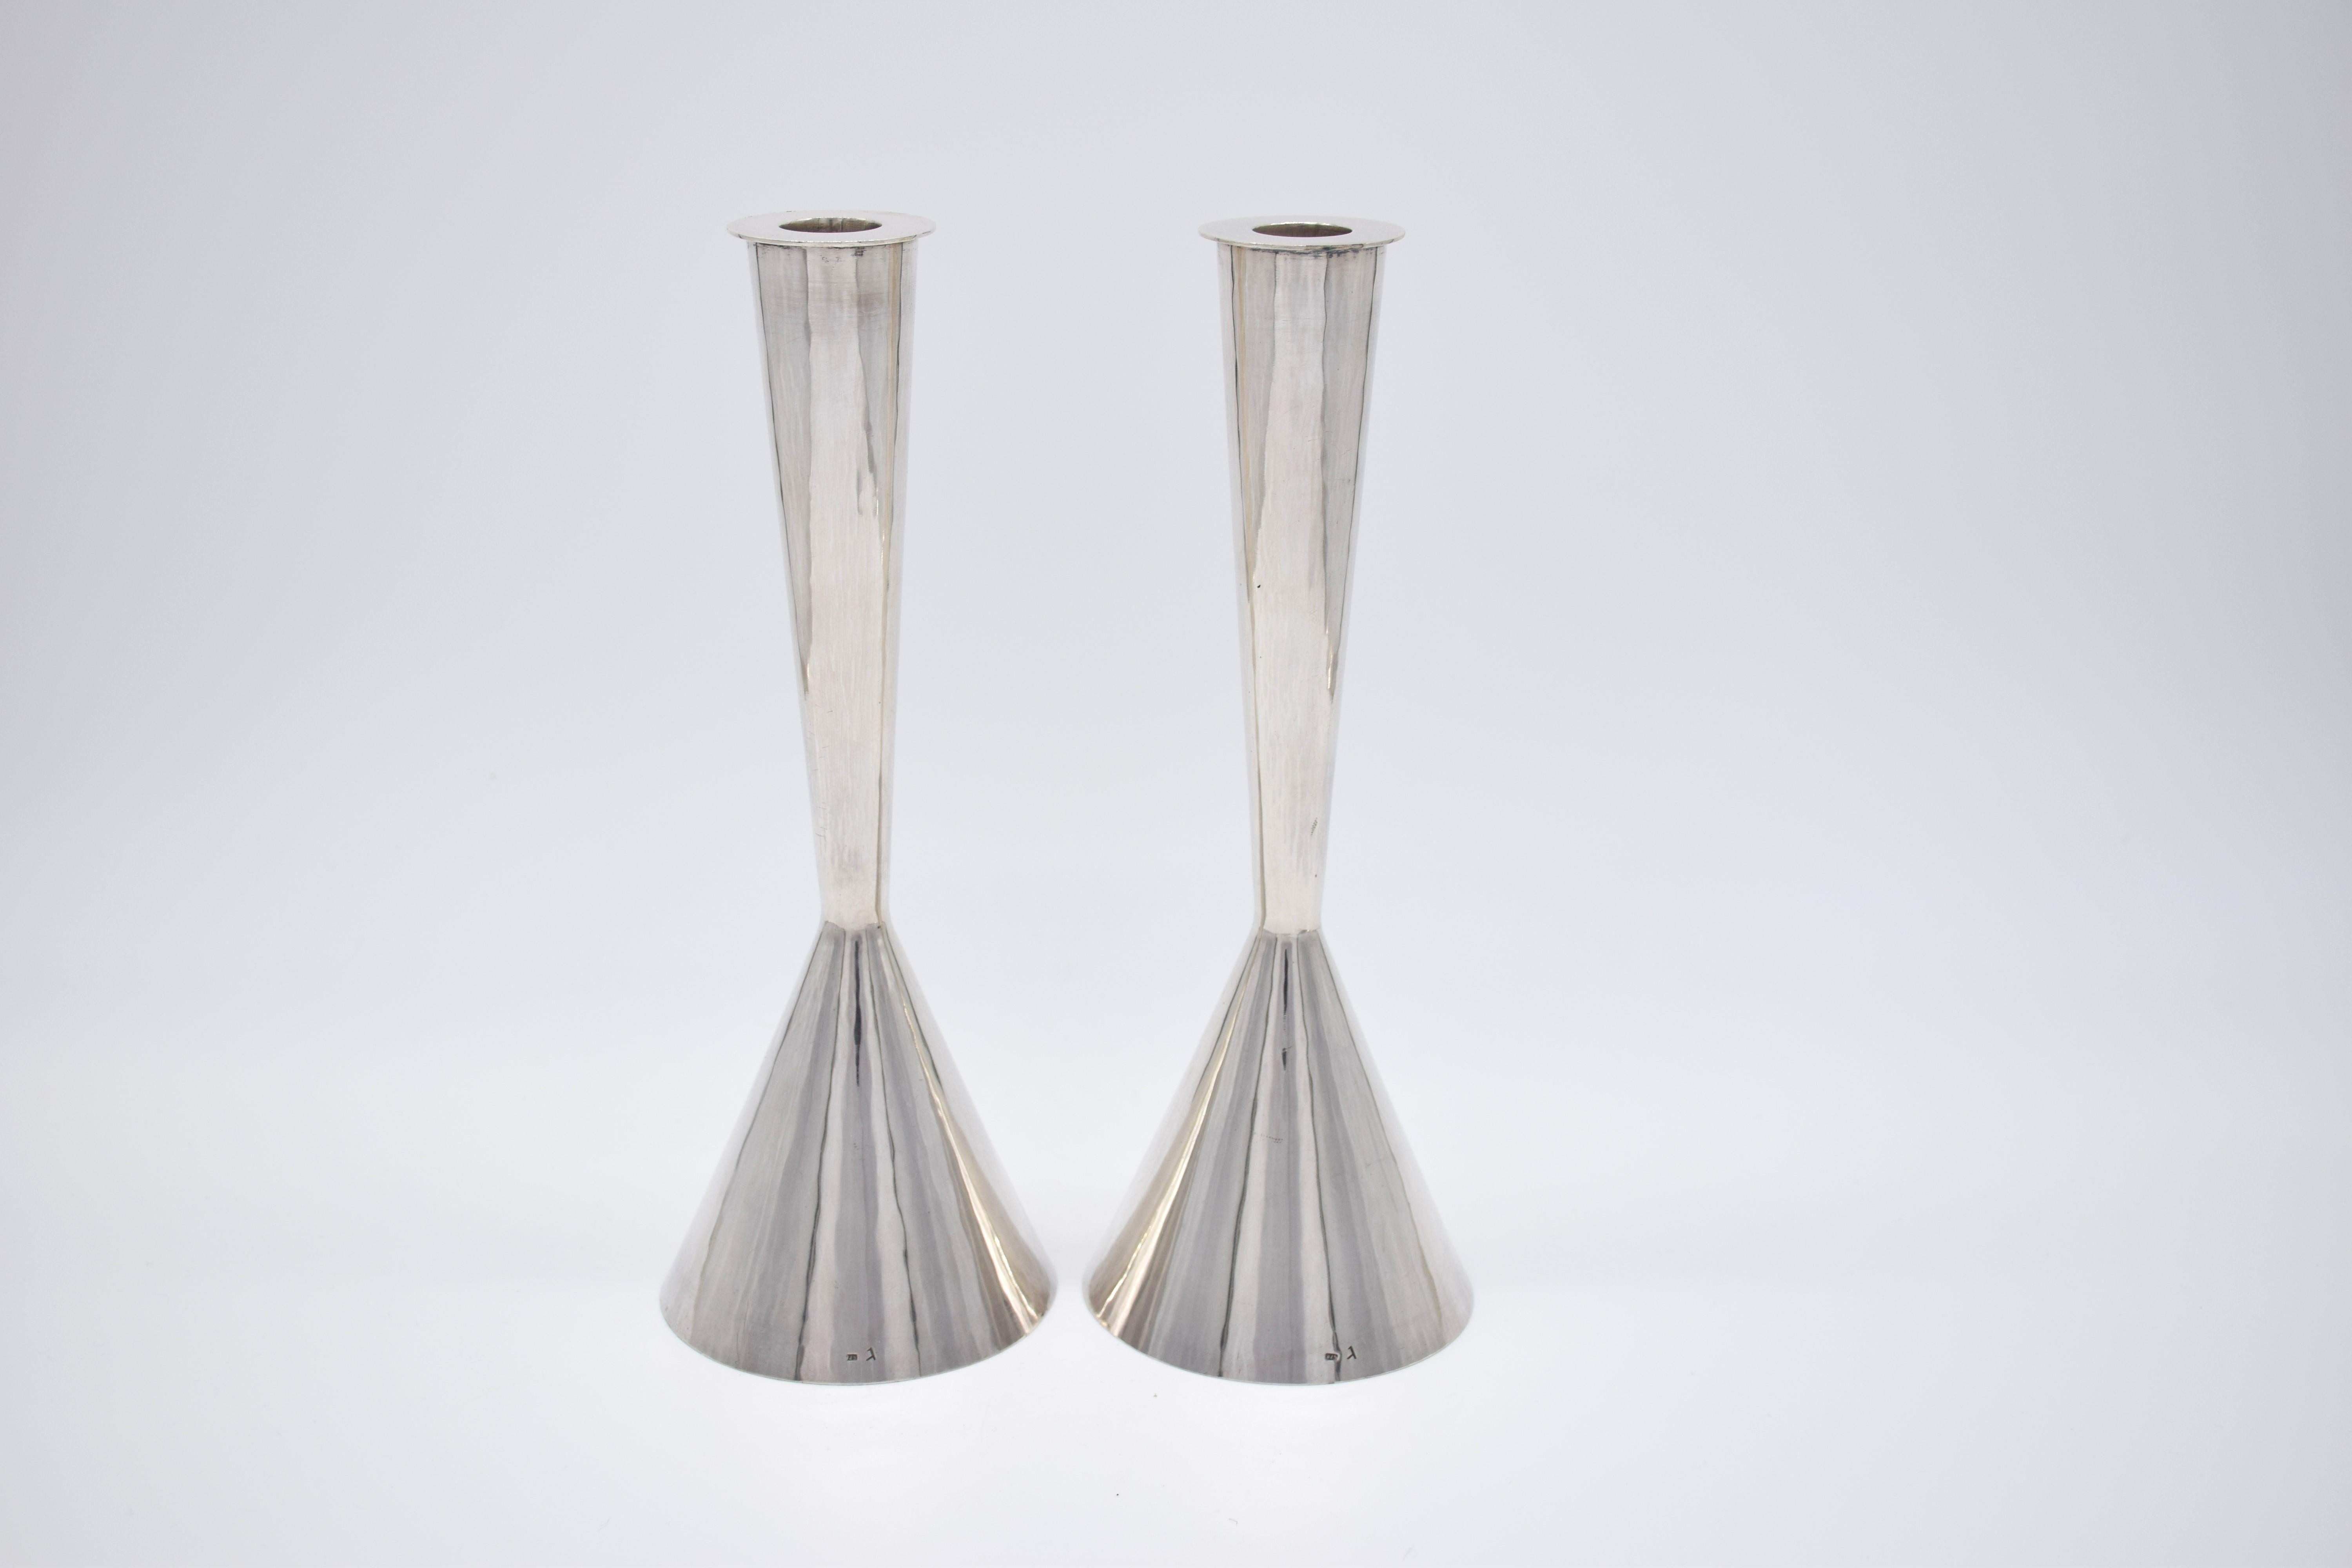 We are offering here this perfectly designed pair of sterling silver candlesticks, all hand Hammered in a fine and sleek Bauhaus design, the candlesticks were made after Gumbel Left his work in the bezalel school of arts in Jerusalem, they date from